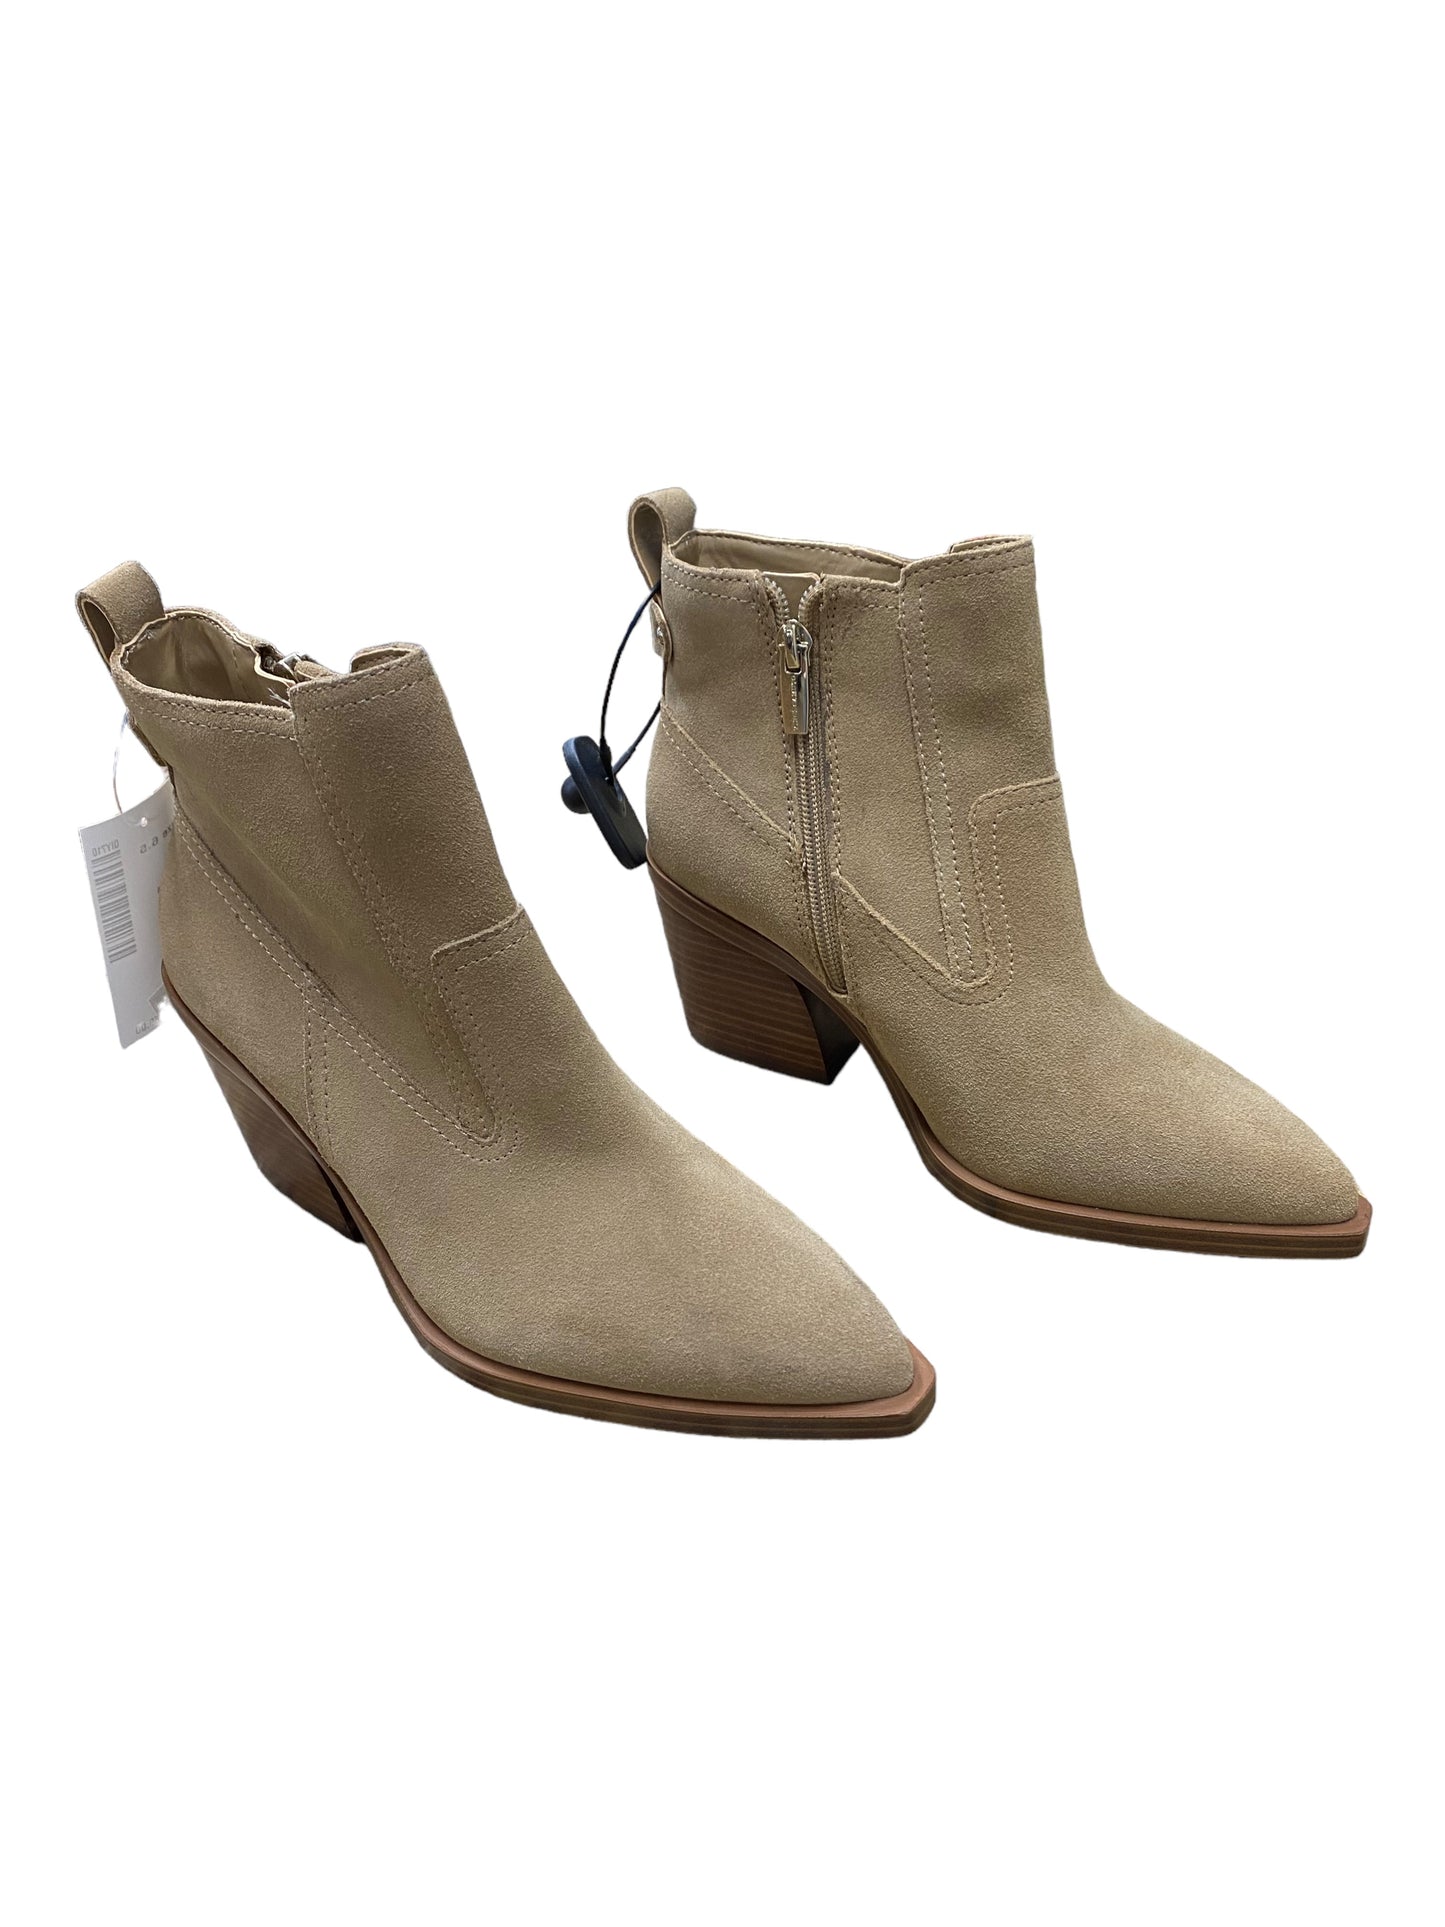 Tan Boots Ankle Heels Vince Camuto, Size 6.5